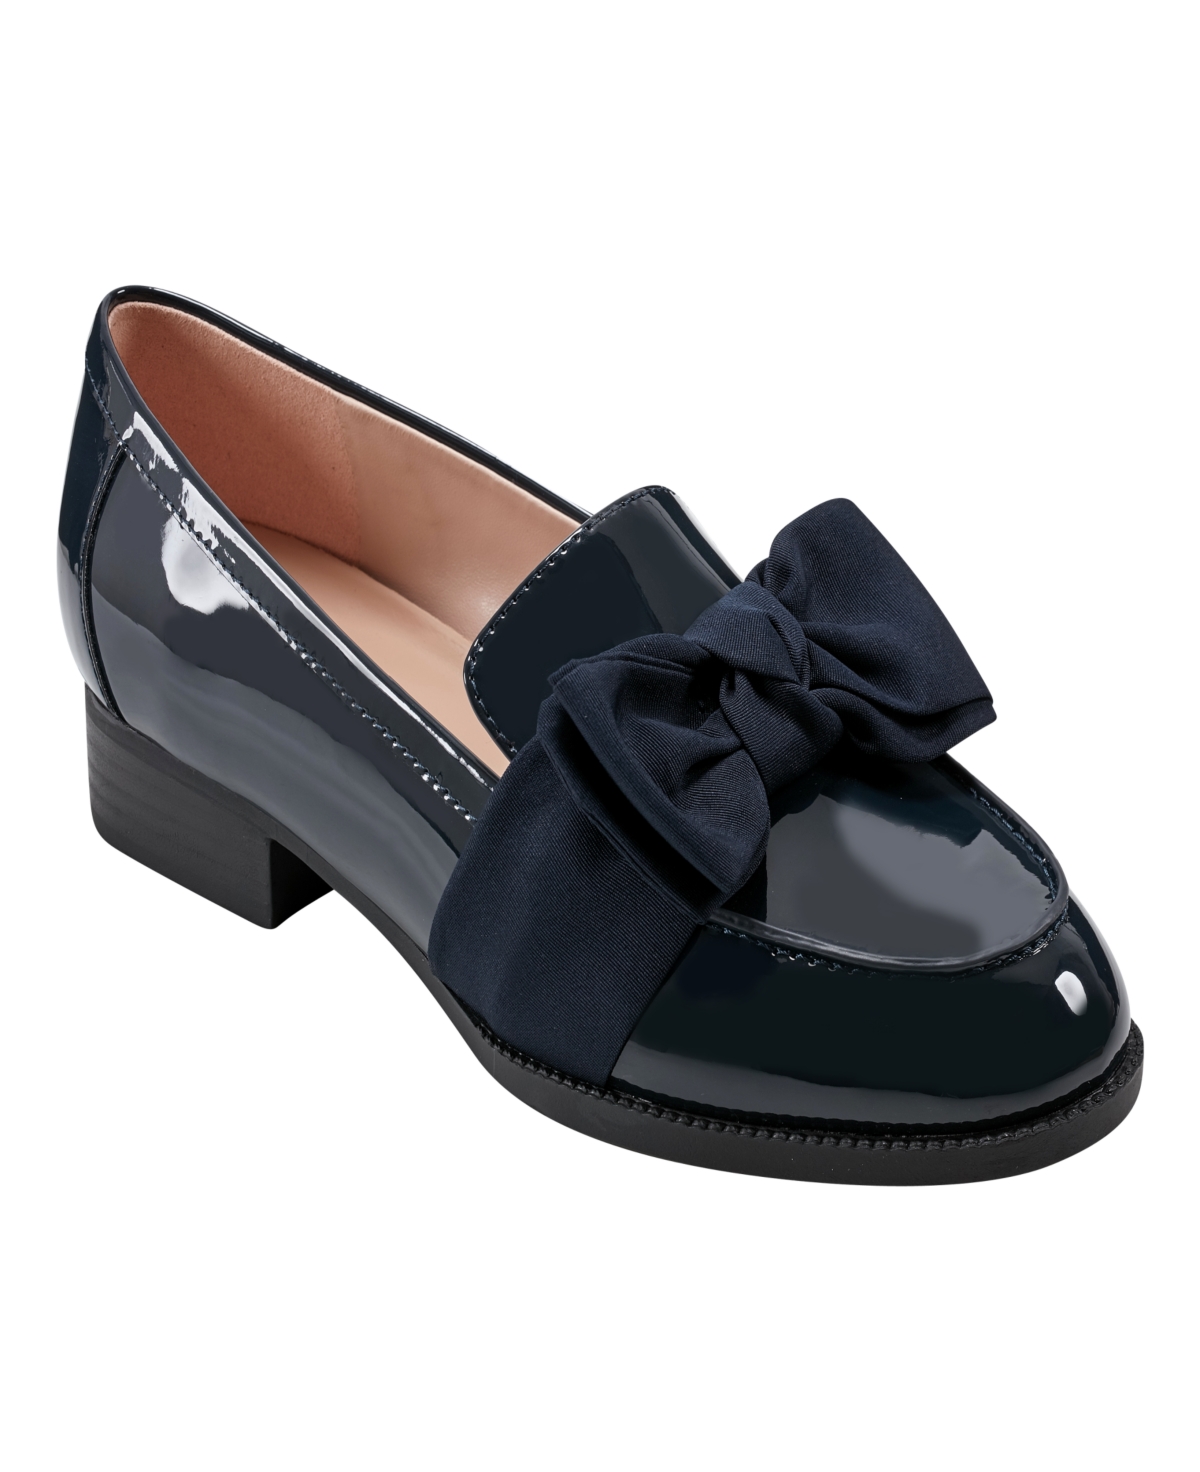 Women's Lindio Bow Detail Block Heel Slip On Loafers - Navy Patent - Faux Patent Leather, Texti